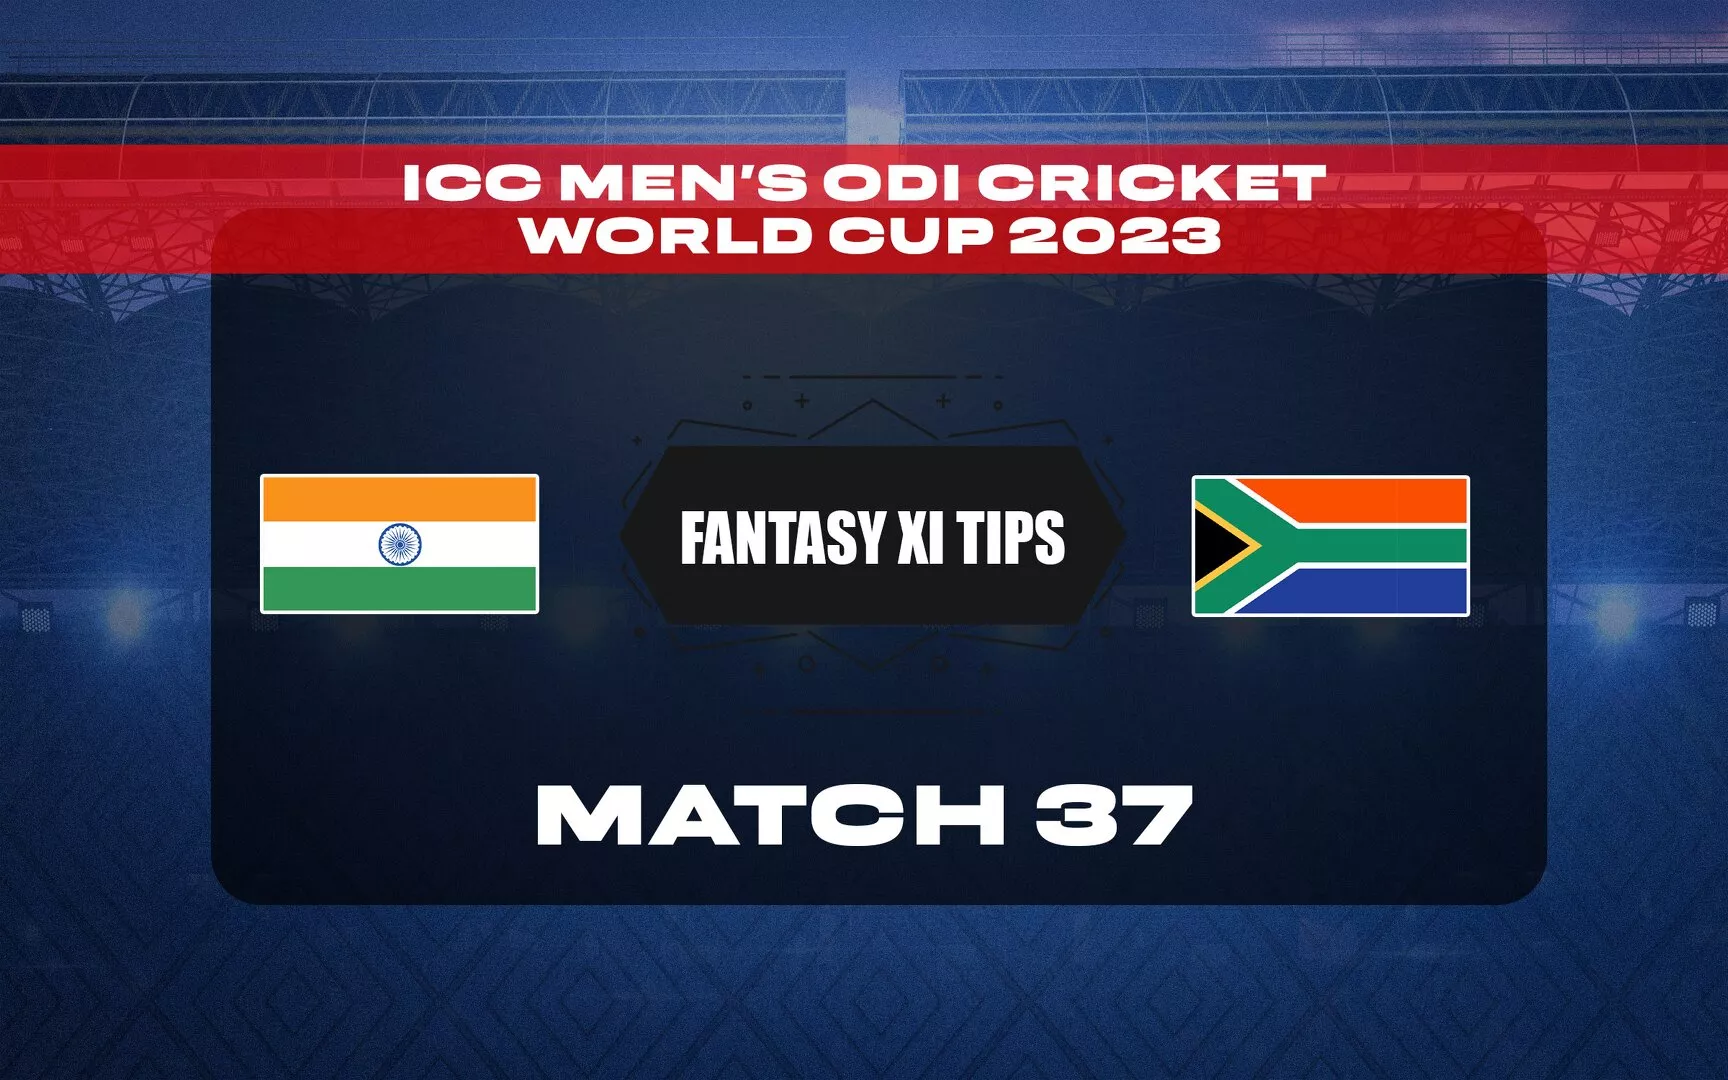 IND vs SA Dream11 Prediction, Dream11 Playing XI, Today Match 37, ICC